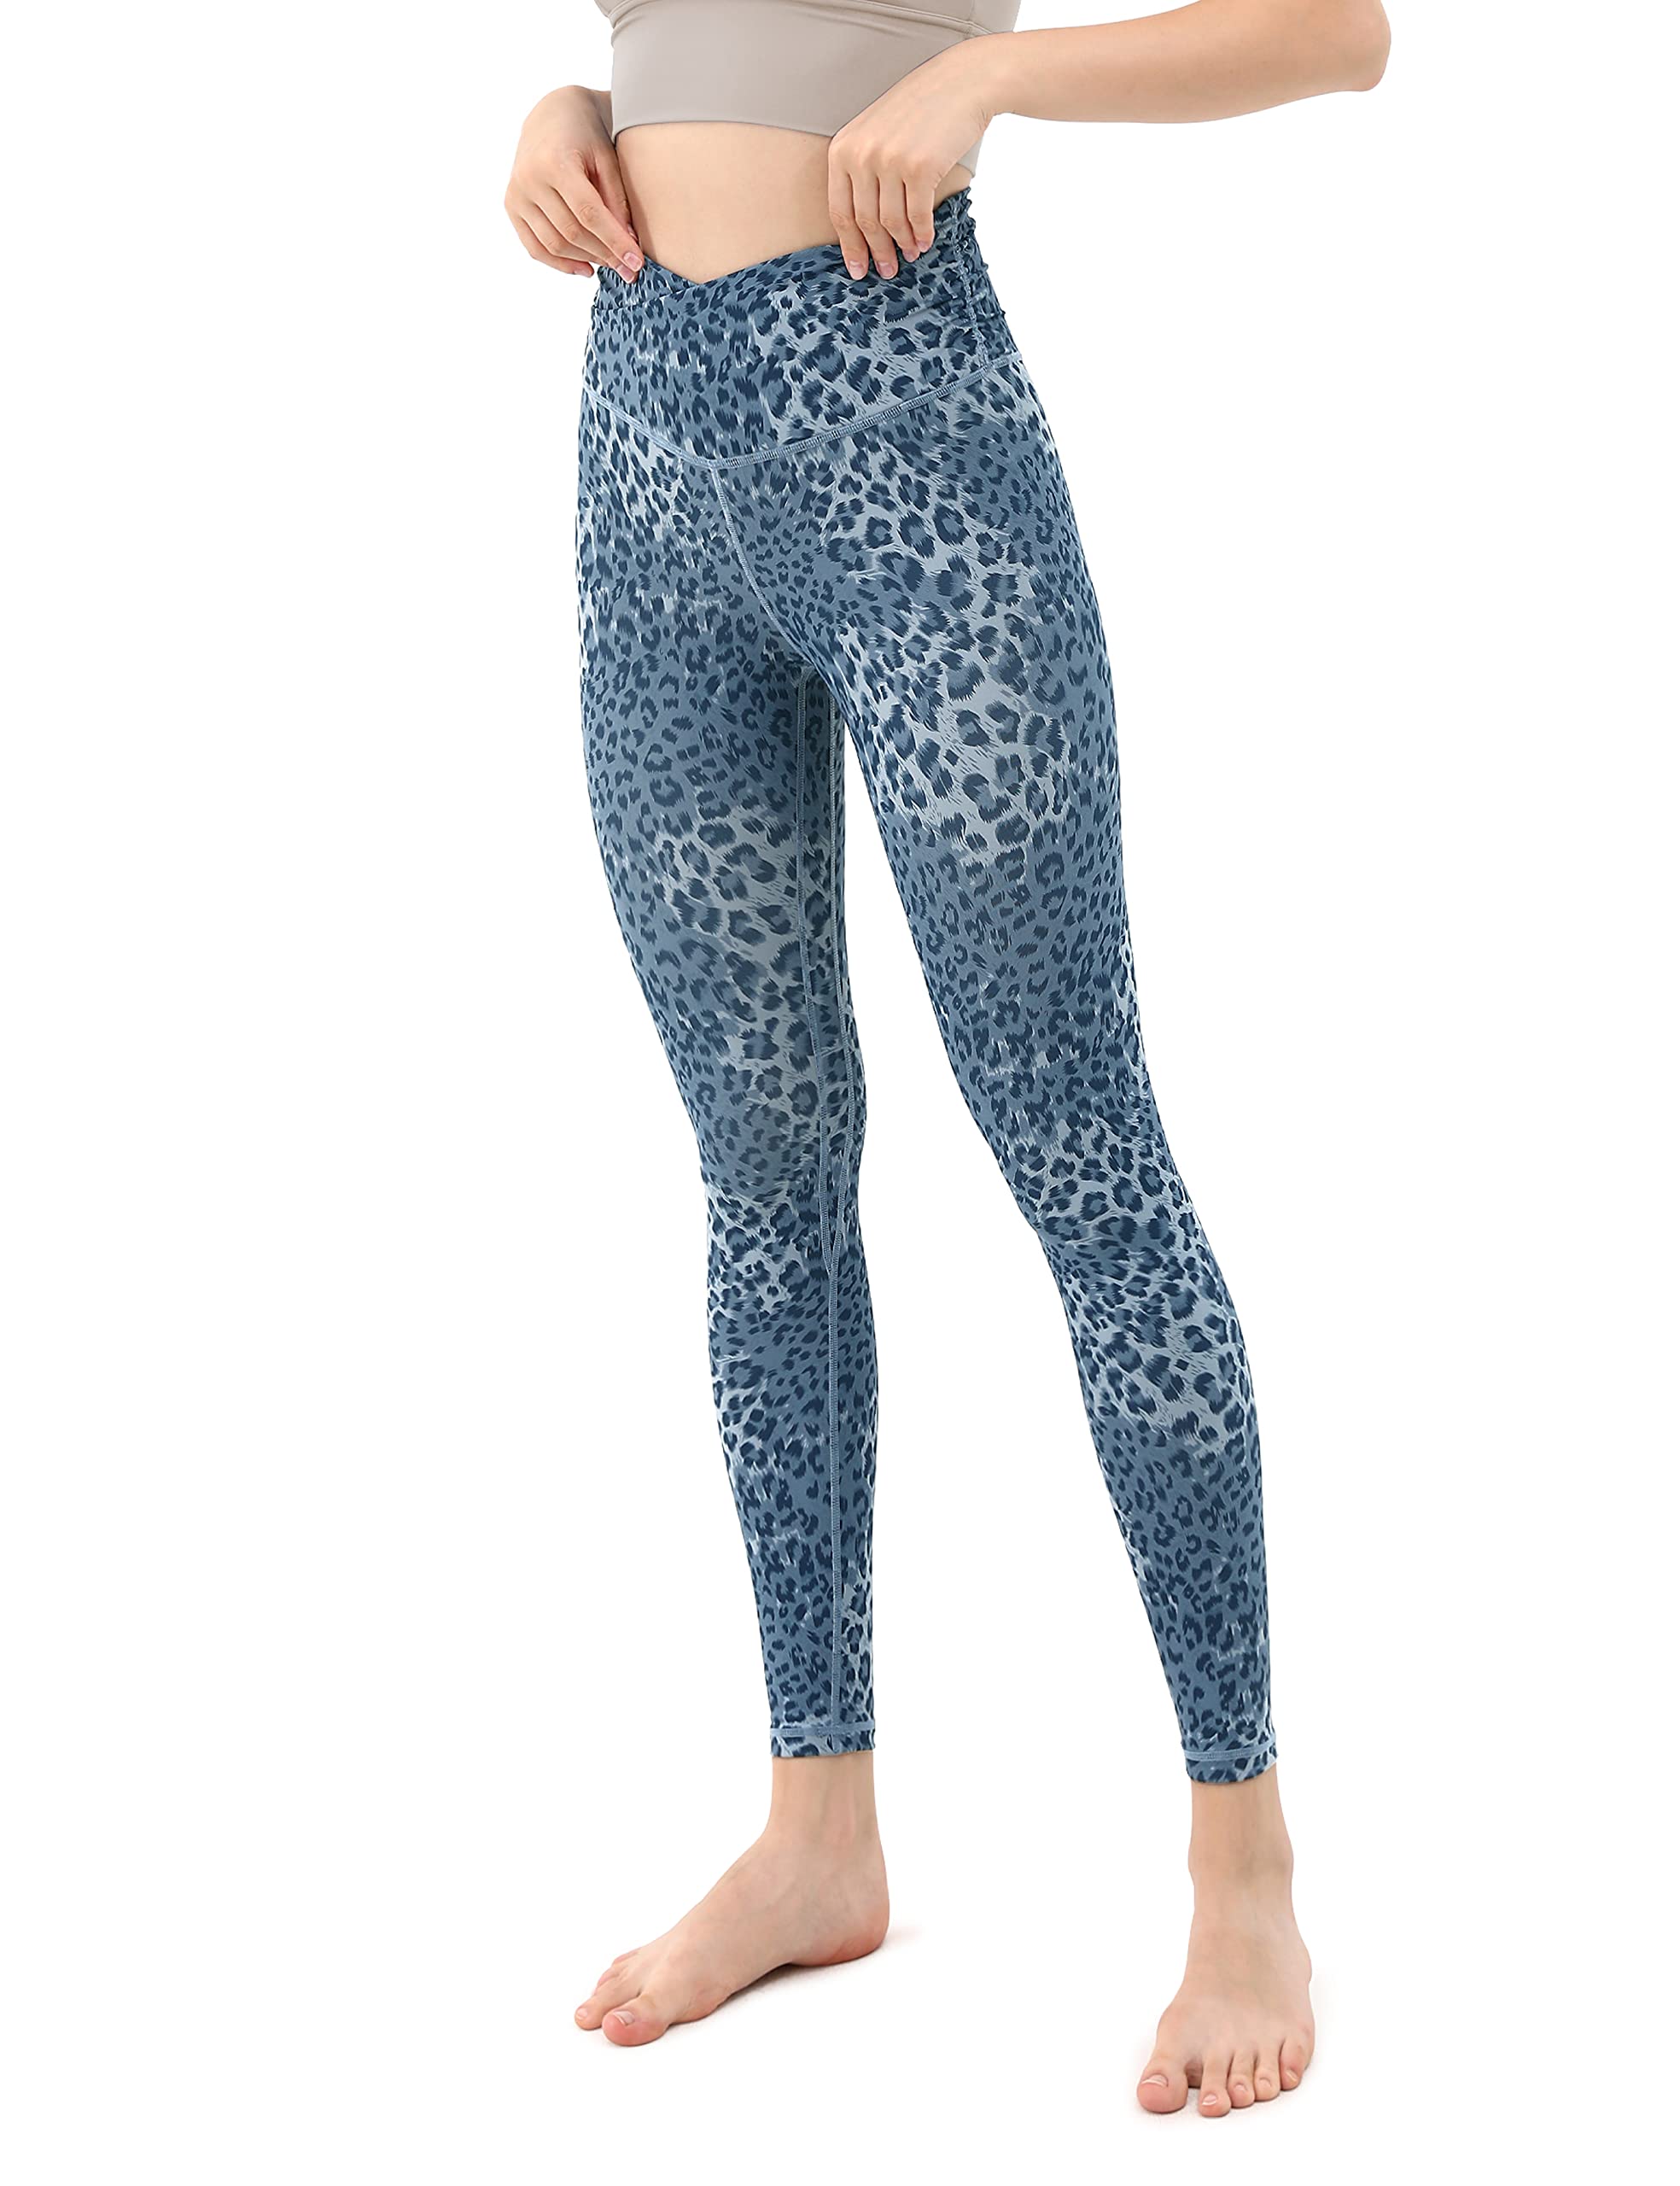 ODODOS Womens cross Waist 78 Yoga Leggings with Inner Pocket, Workout  Running Tights Yoga Pants -Inseam 25, Blue Leopard, Large